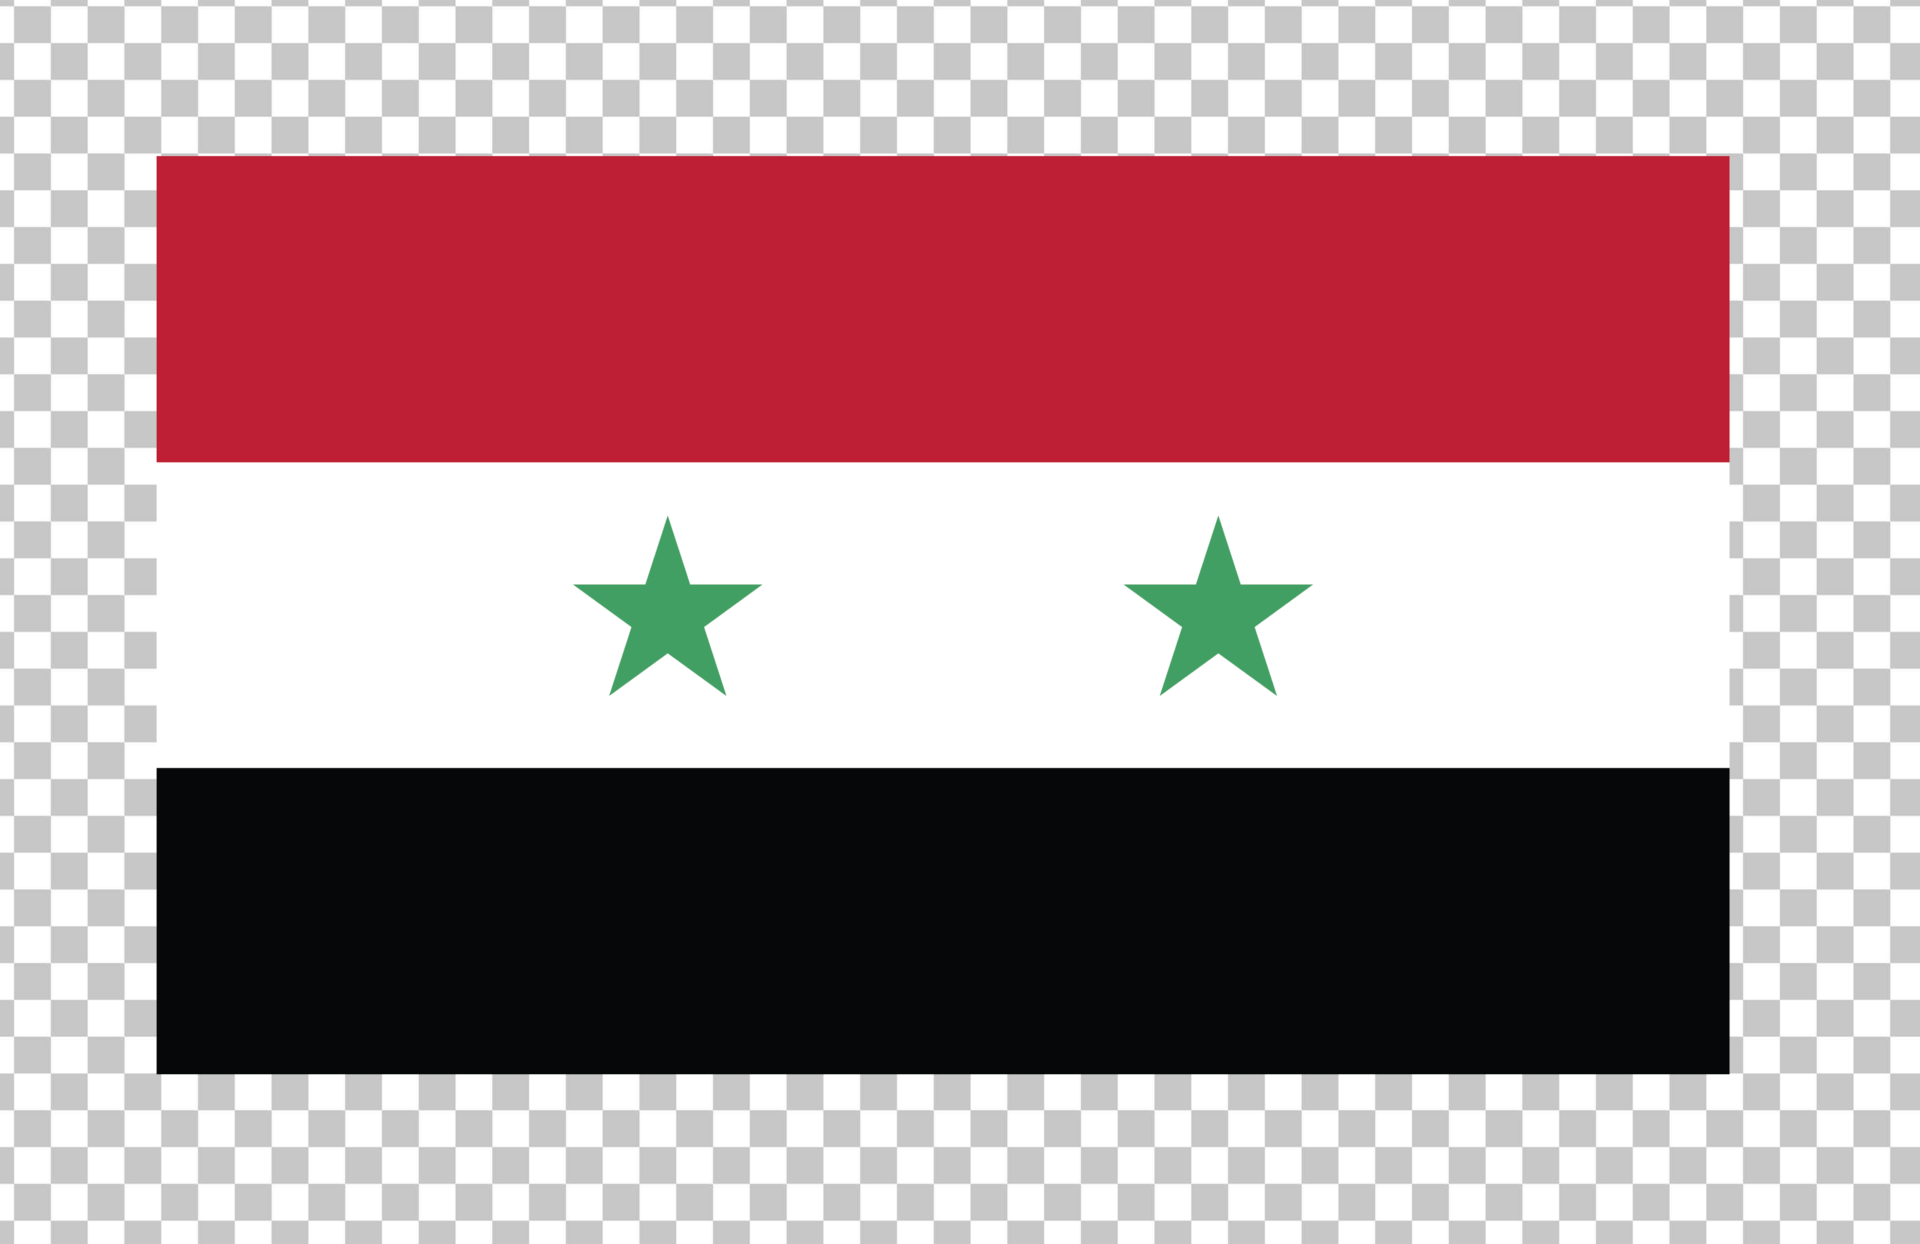 Flag of Syria PNG Image